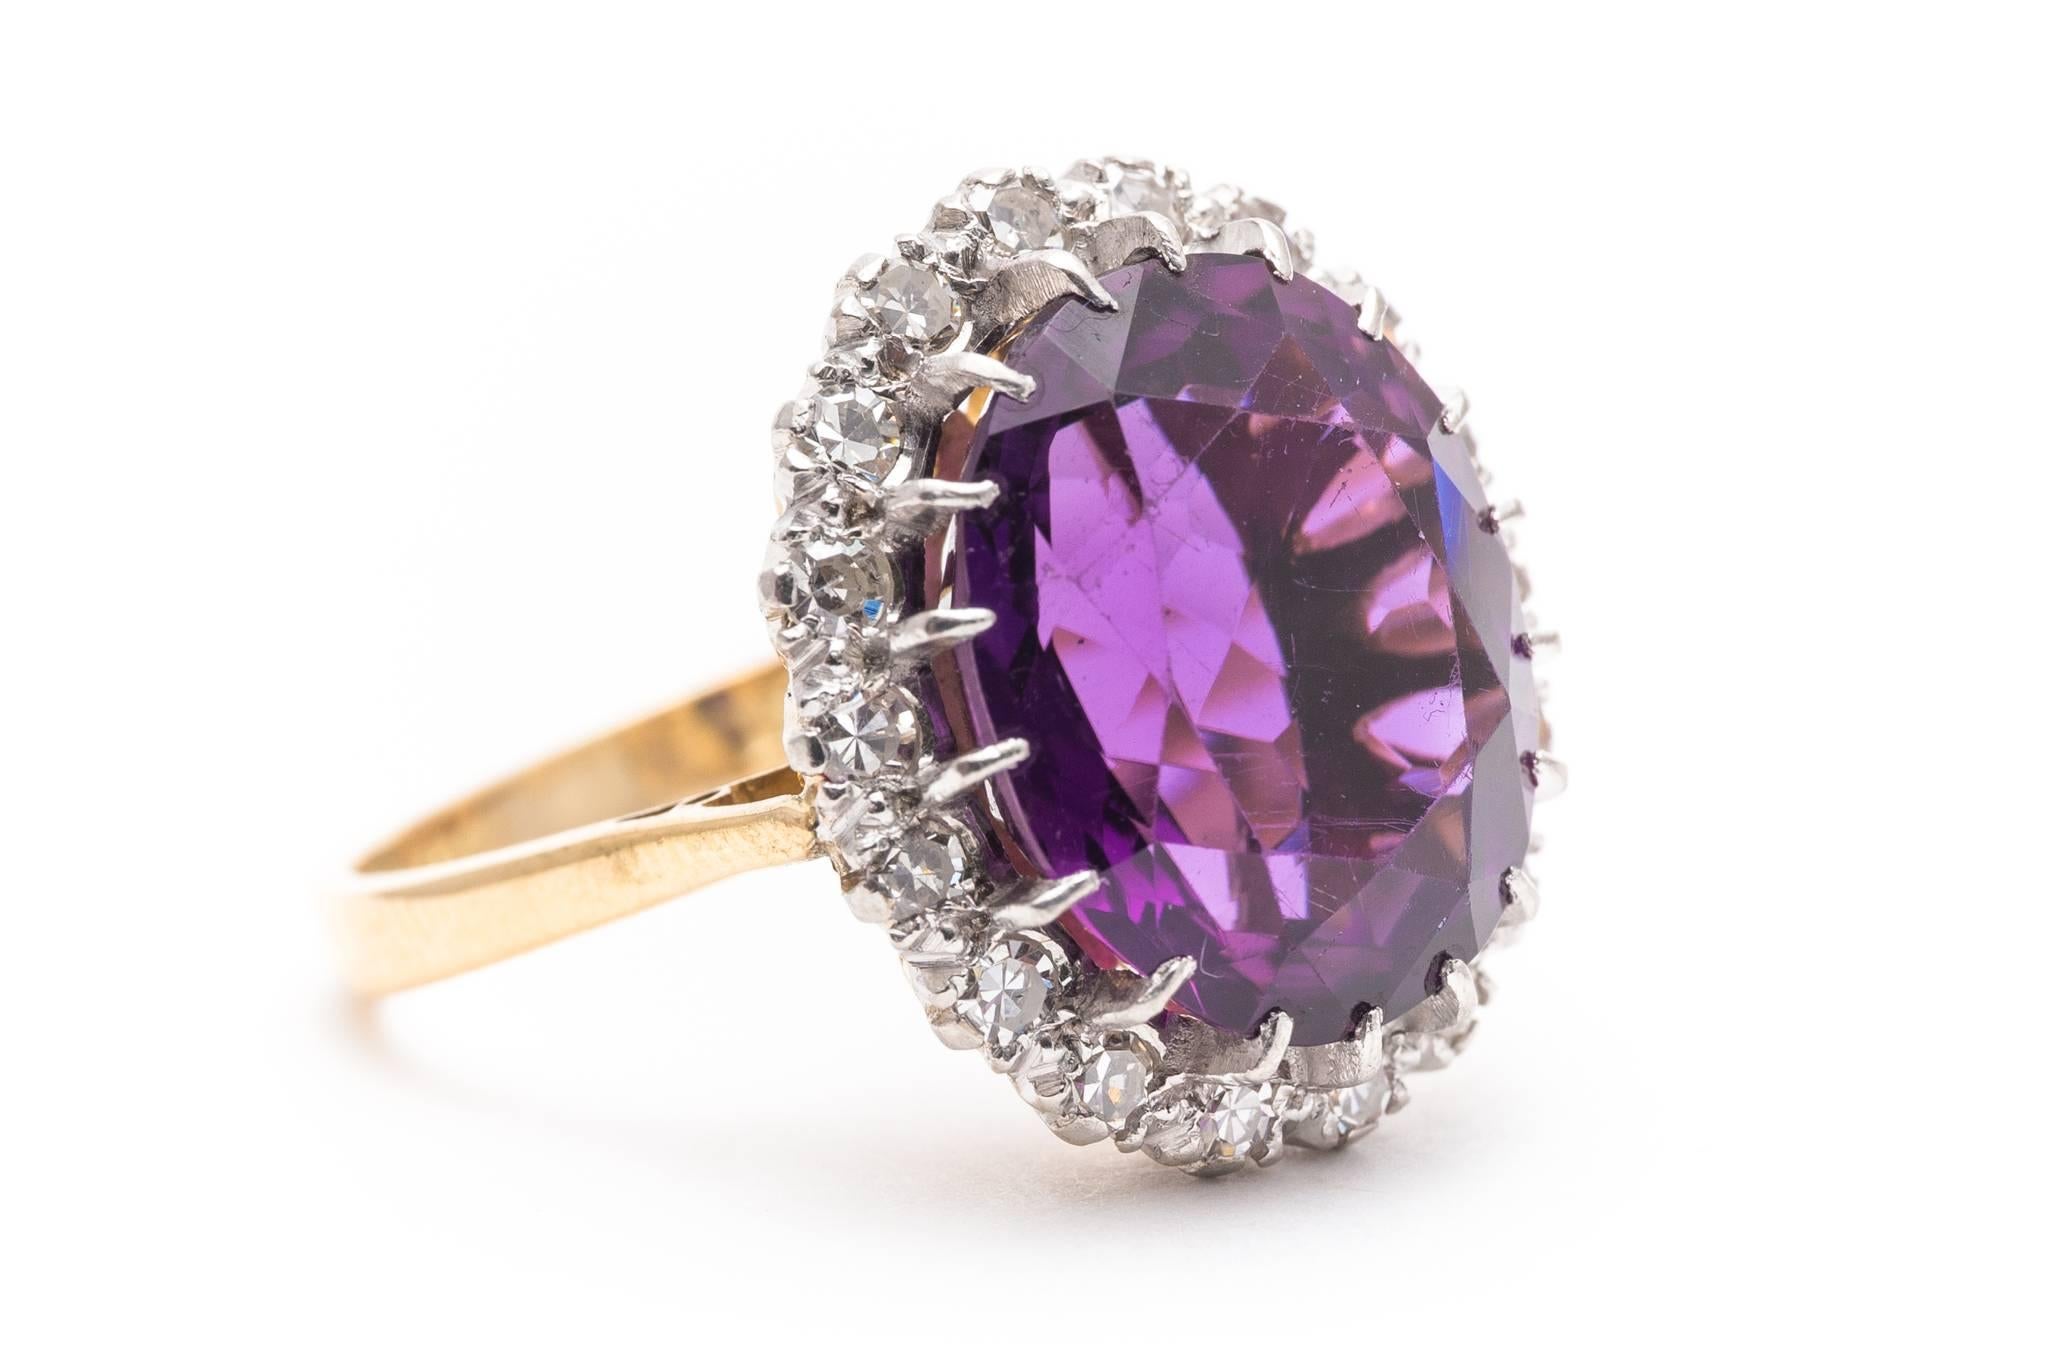 Beacon Hill Jewelers Presents:

An edwardian period amethyst and diamond ring in platinum and 18 karat yellow gold. Centered by a large natural amethyst this ring features a halo of sparkling antique Swiss cut diamonds set in luxurious platinum.

Of